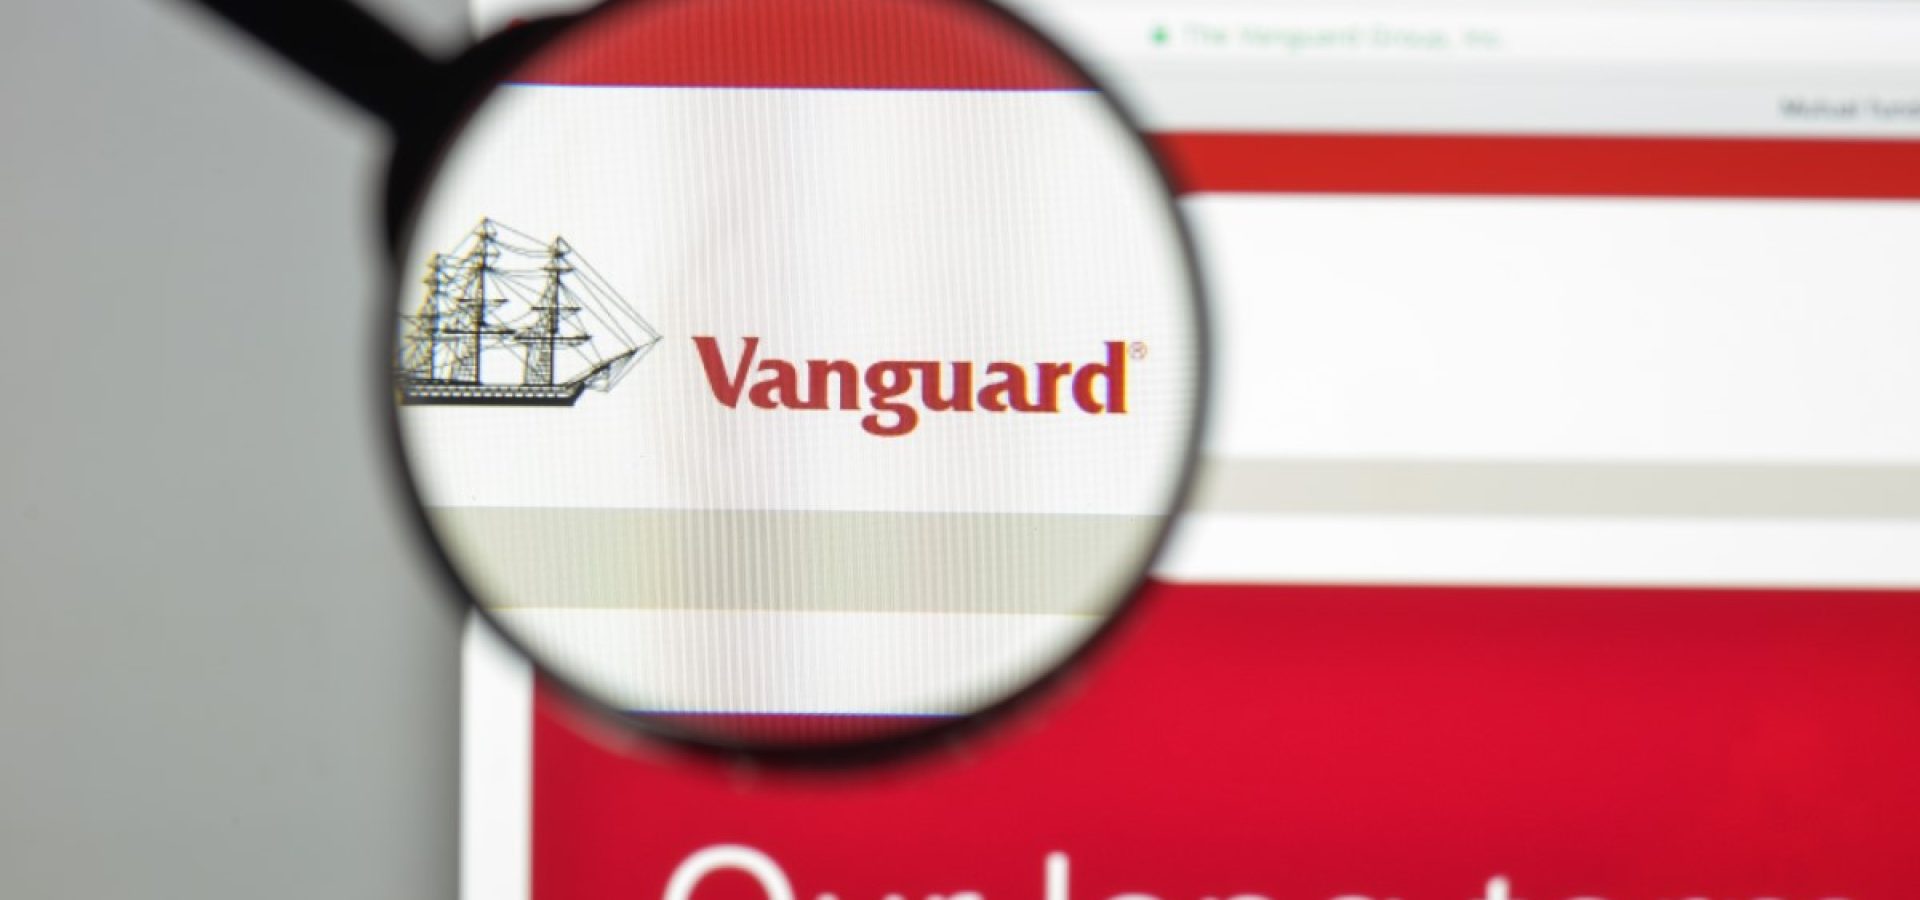 Vanguard's New Algorithms will Connect Buyers and Sellers